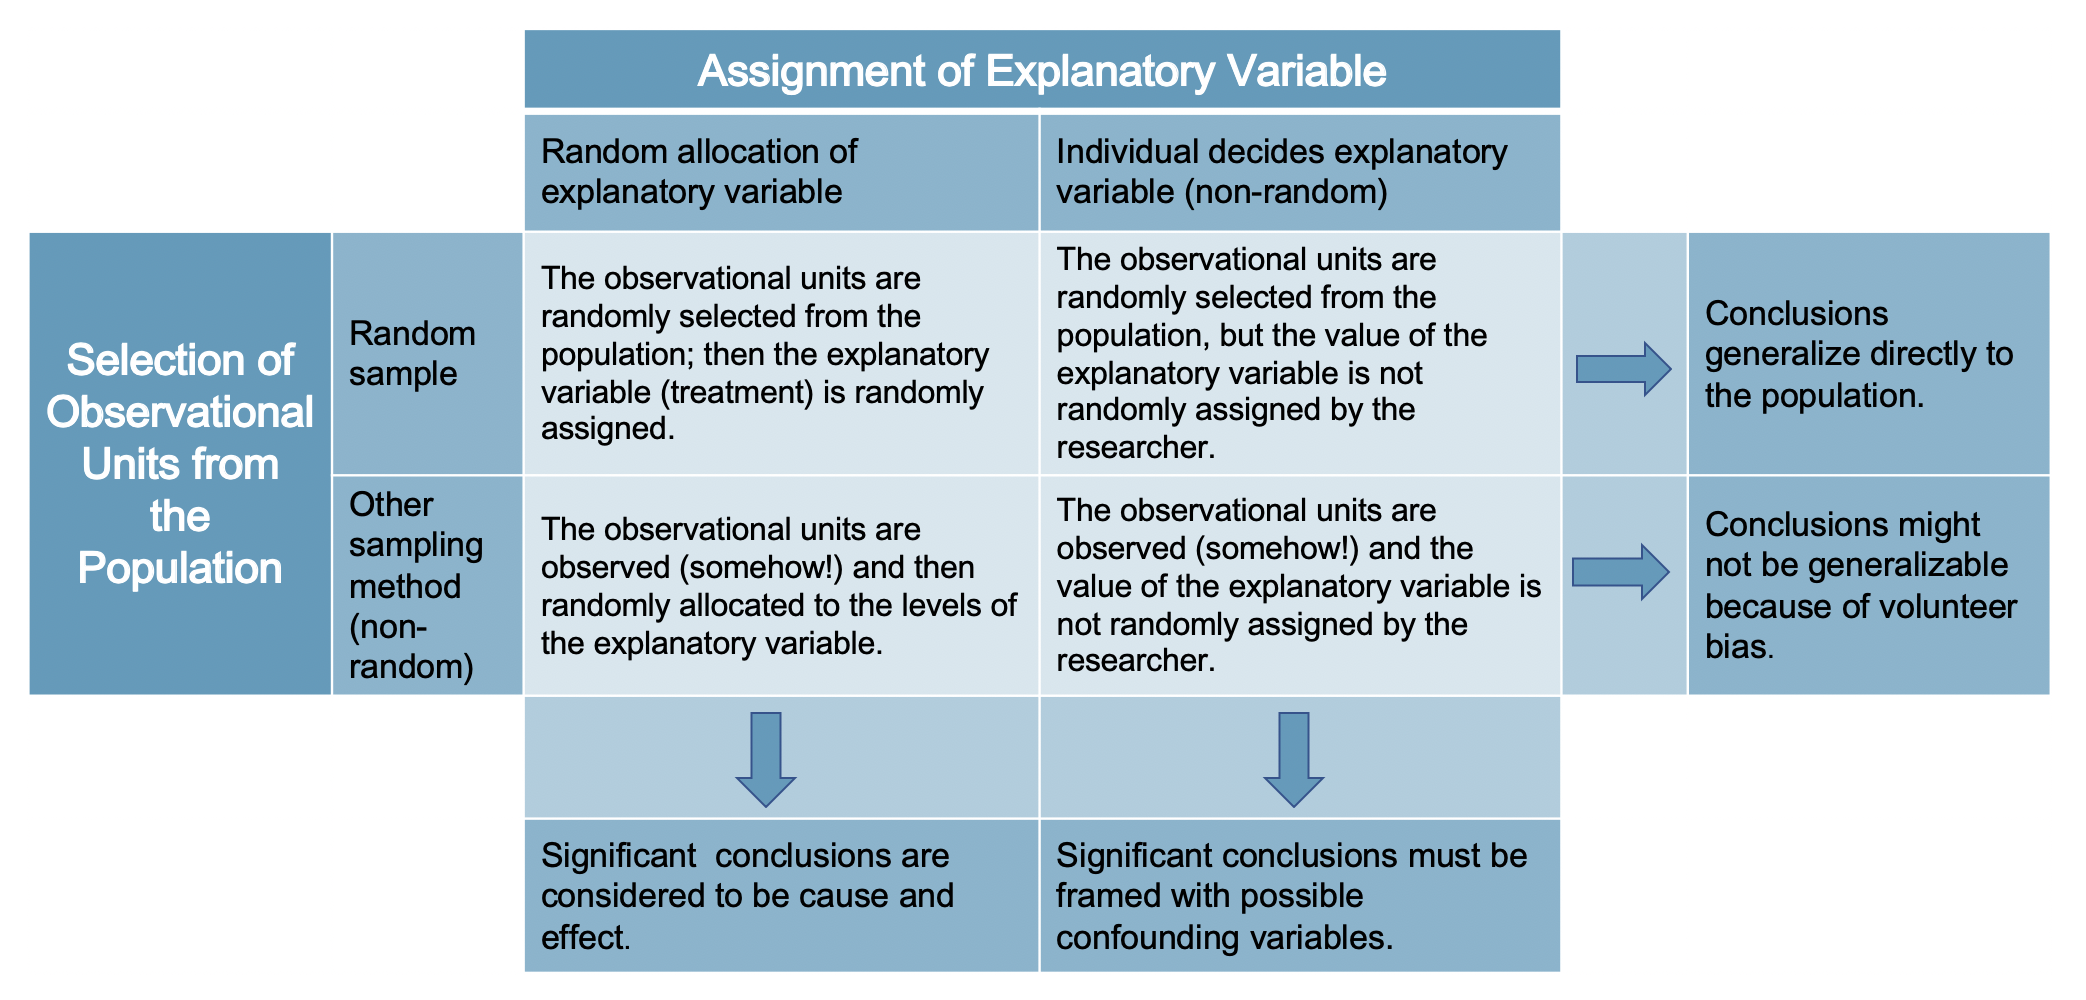 As we will see, analysis conclusions should be made carefully according to how the data were collected.  Note that very few datasets come from the top left box because usually ethics require that random assignment of treatments can only be given to volunteers. Both representative (ideally random) sampling and experiments (random assignment of treatments) are important for how statistical conclusions can be made on populations.